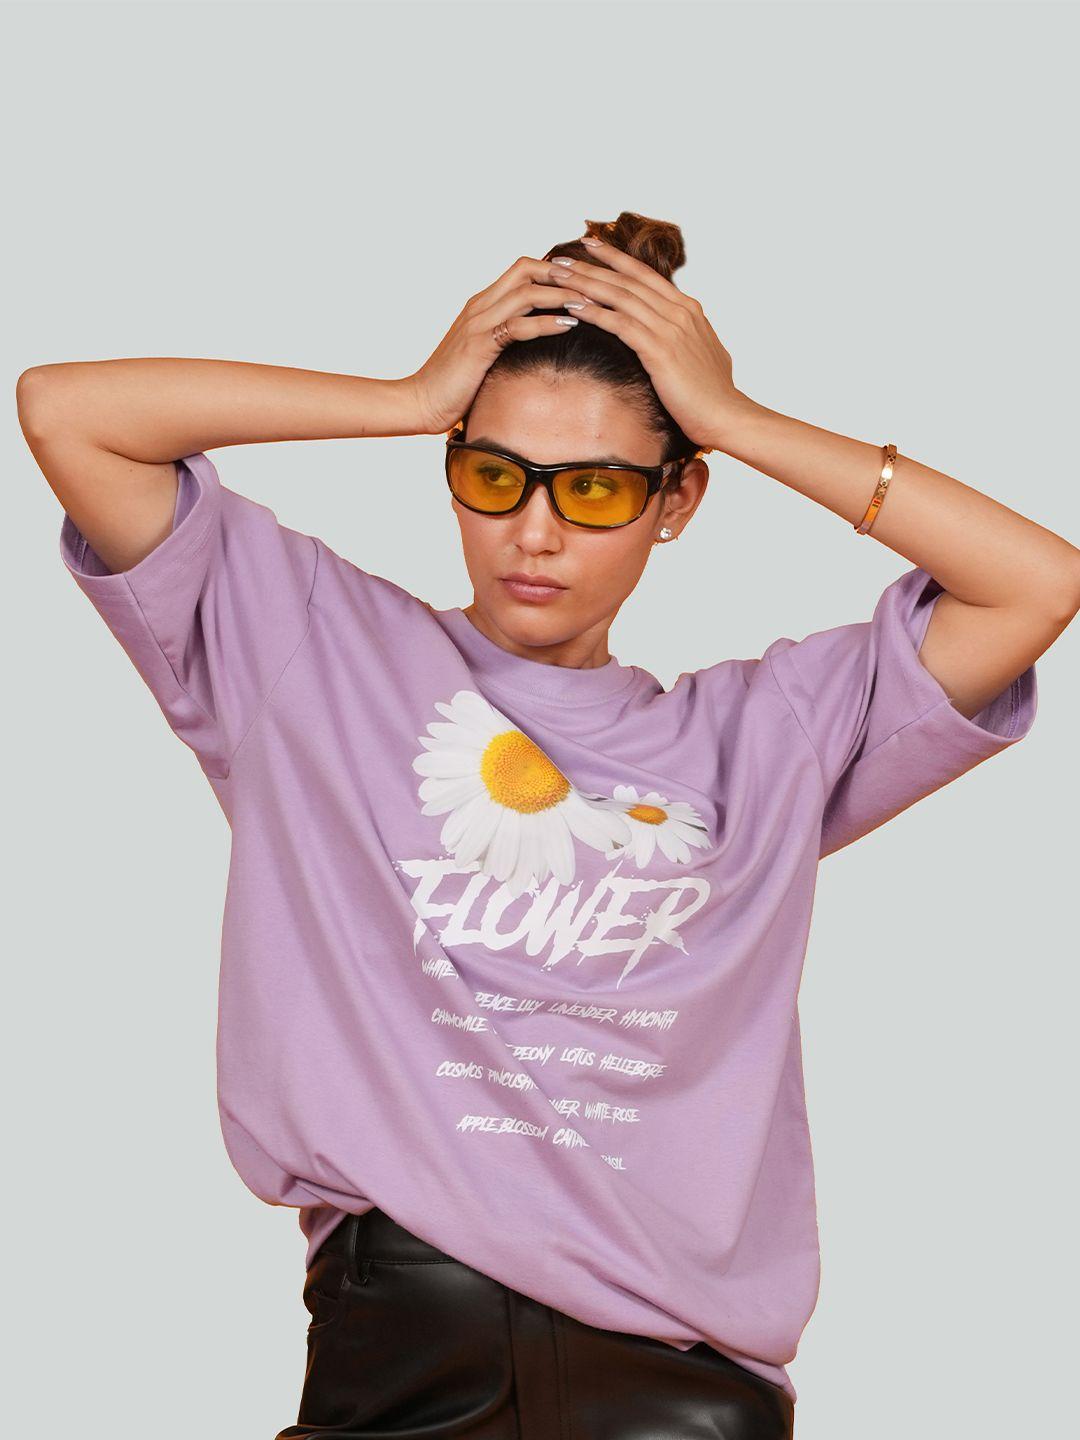 bloopers store graphic printed t-shirt